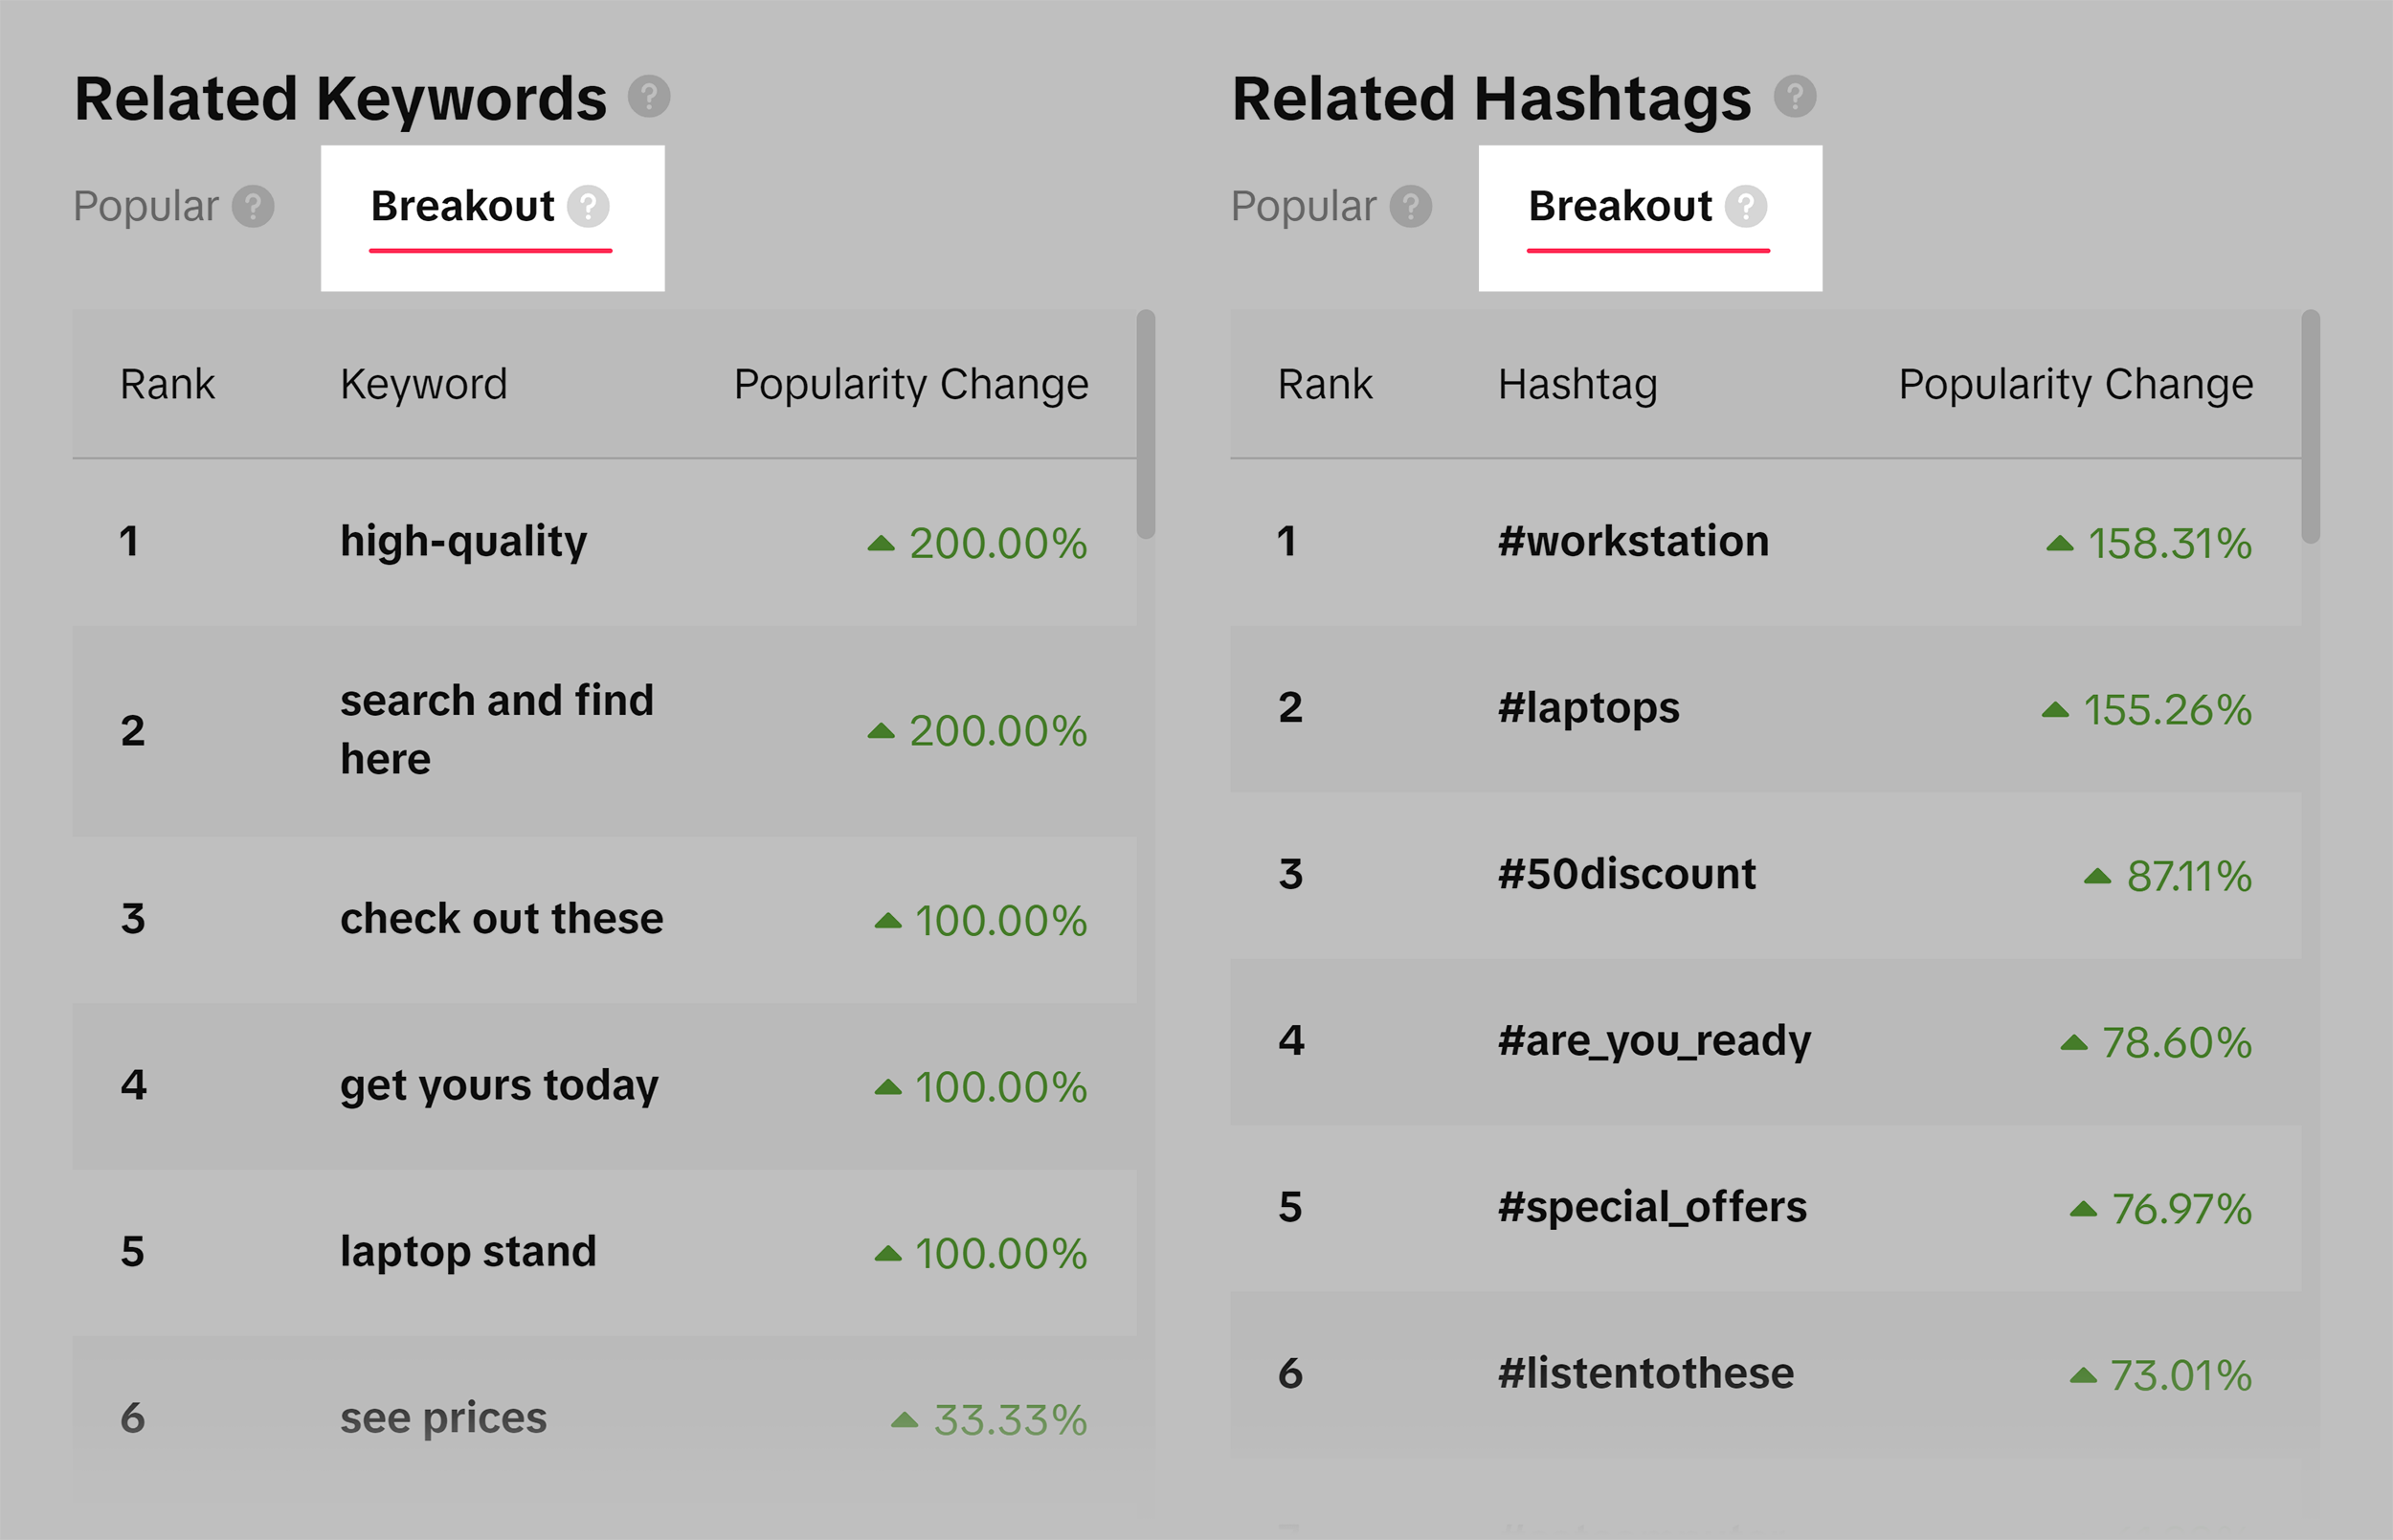 Breakout – Related keywords & hashtags